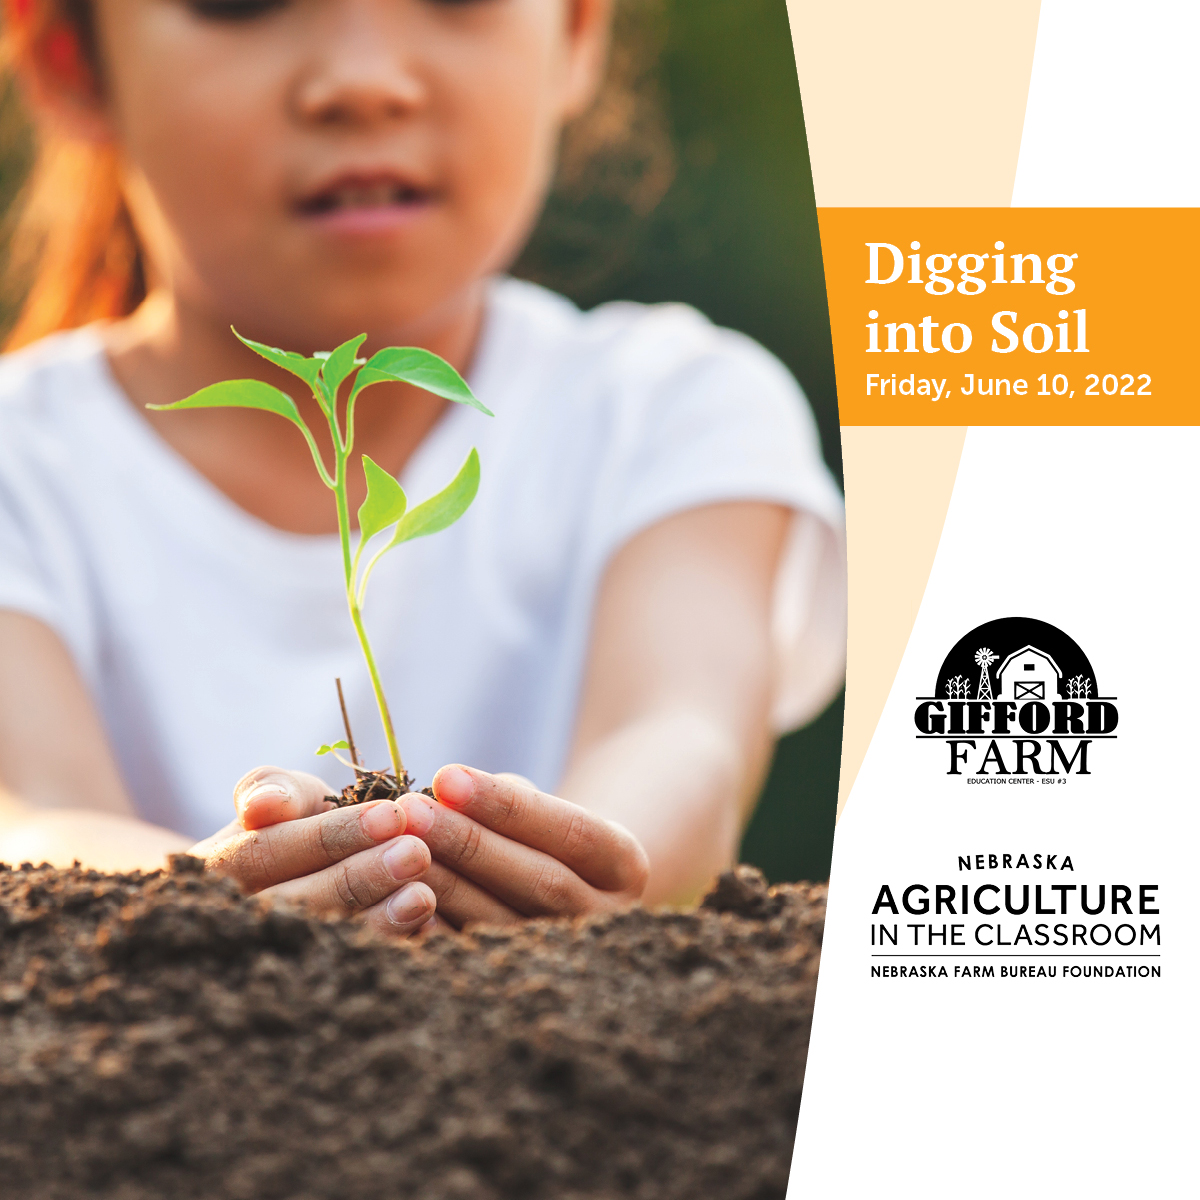 Digging into Soil
Friday, June 10, 2022